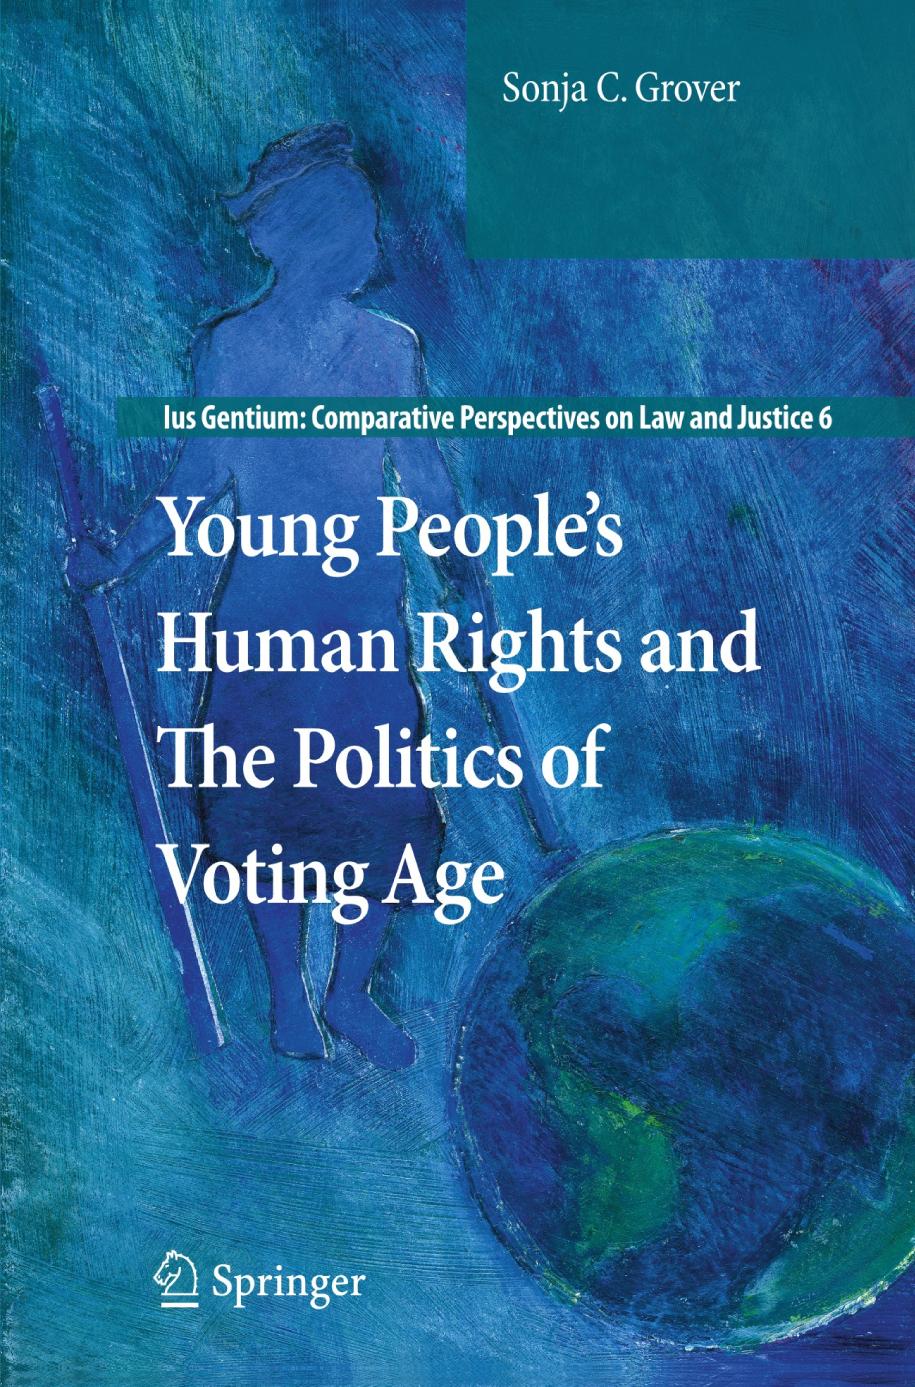 Young People's Human Rights and the Politics of Voting Age